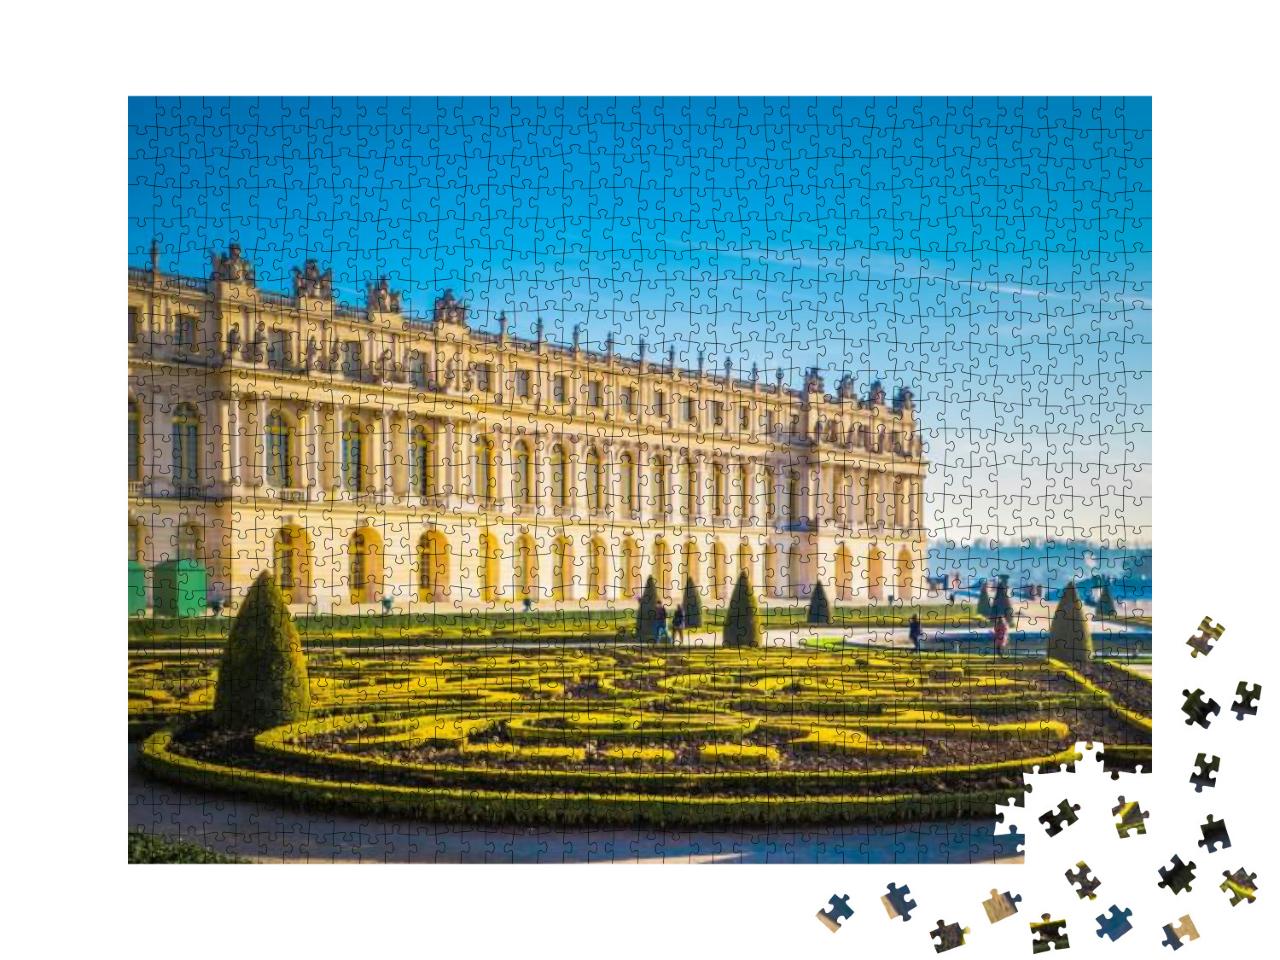 Famous Palace Versailles with Beautiful Gardens Outdoors... Jigsaw Puzzle with 1000 pieces